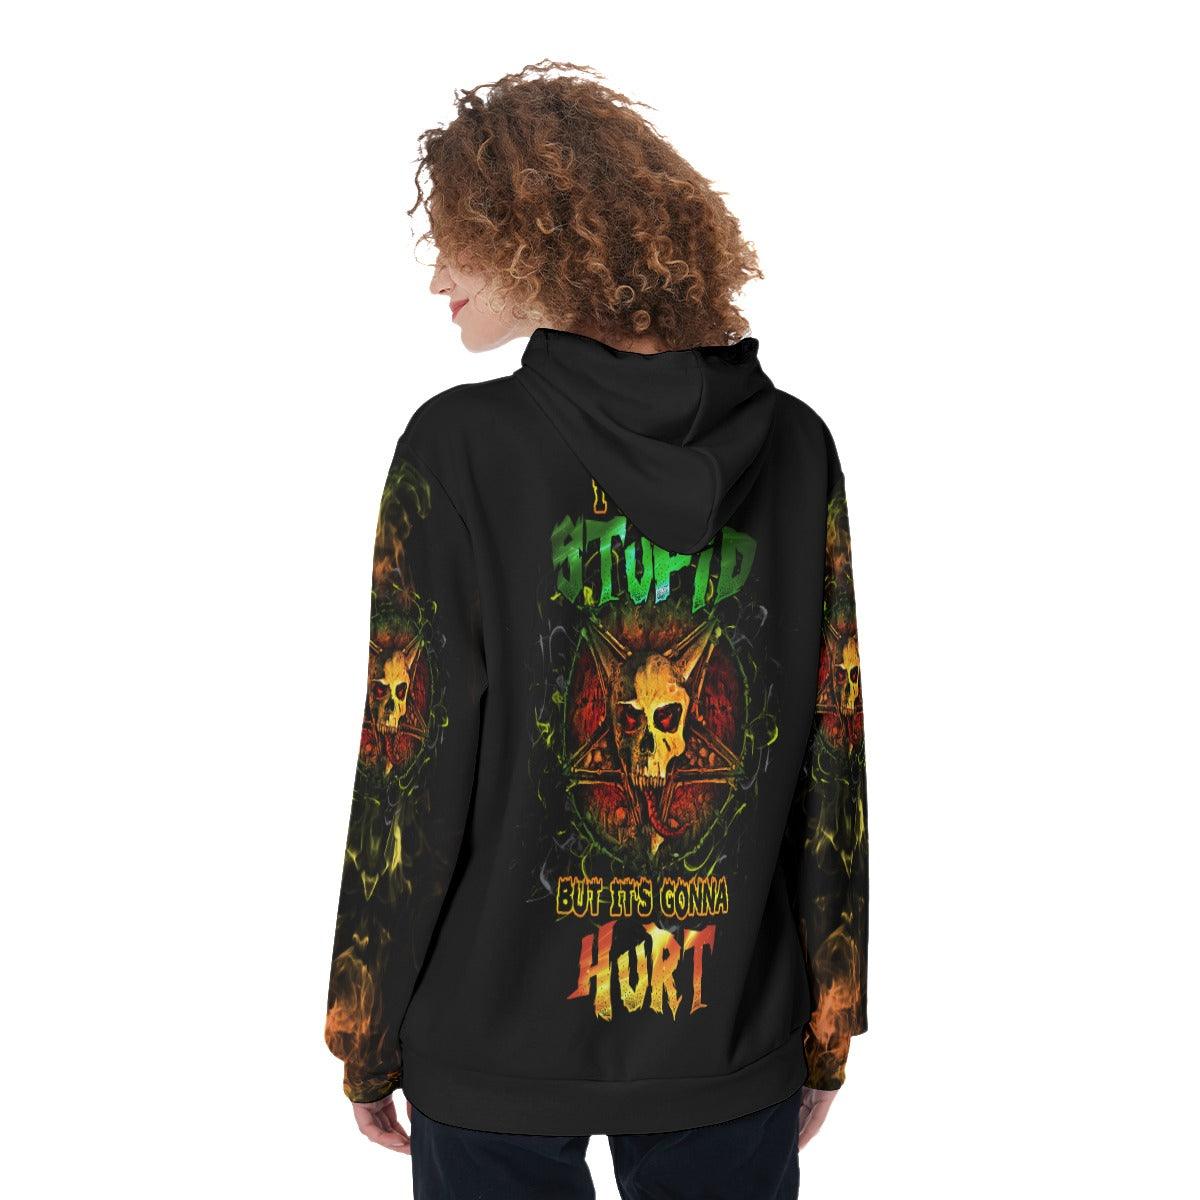 I Can't Fix Stupid But It's Gonna Hurt Funny Hoodie For Women - Wonder Skull